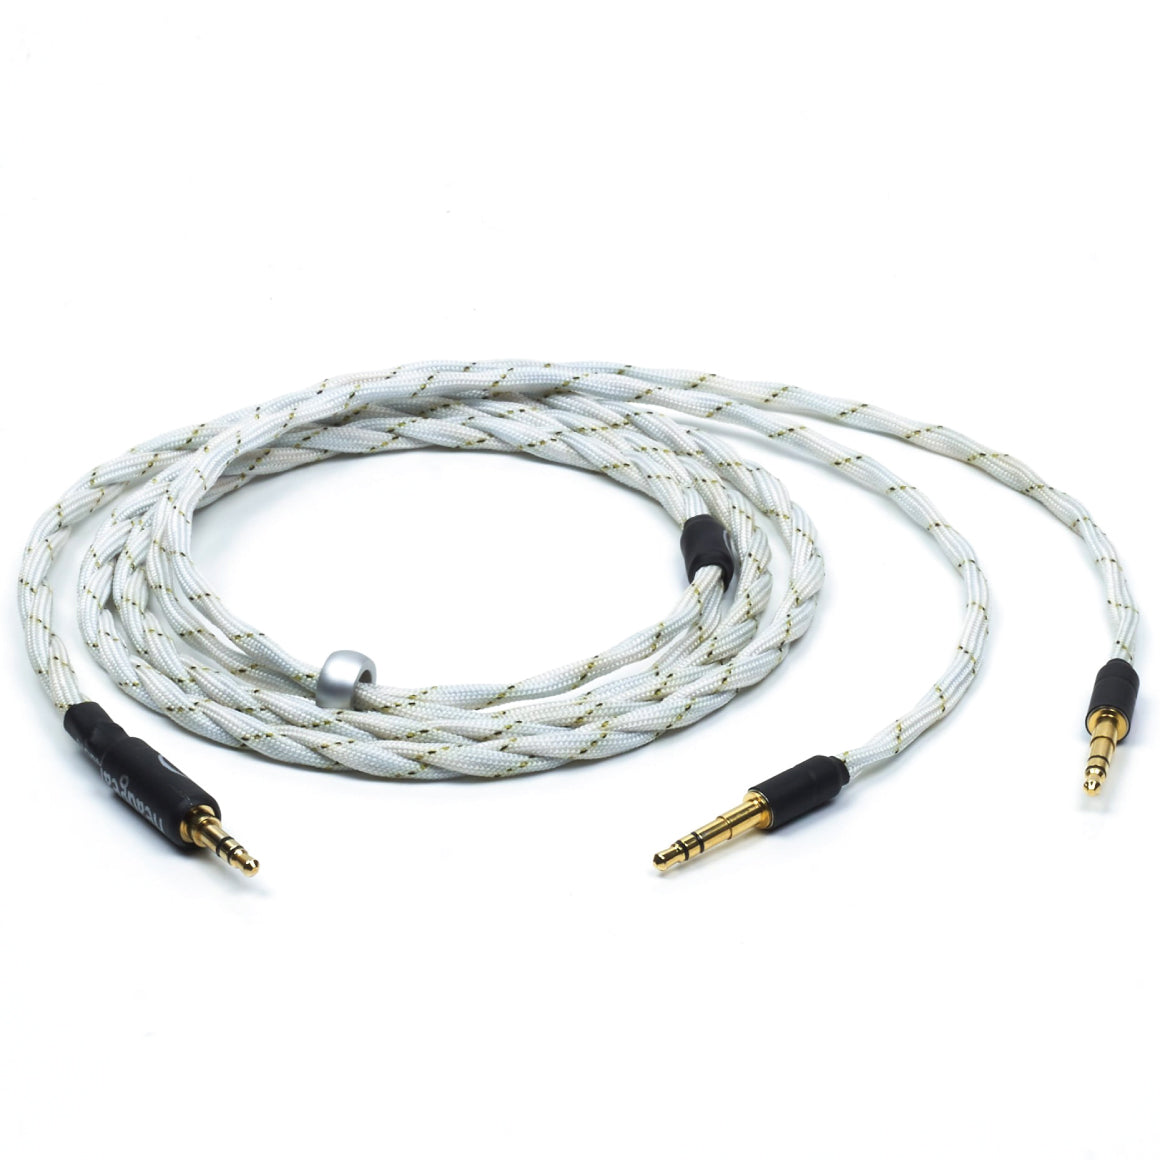 Headphone-Zone-Headgear Audio - Upgrade Cable for Beyerdynamic T1 2nd Generation / T5p Second Generation/ Sleeved - 4 Pin XLR Balanced